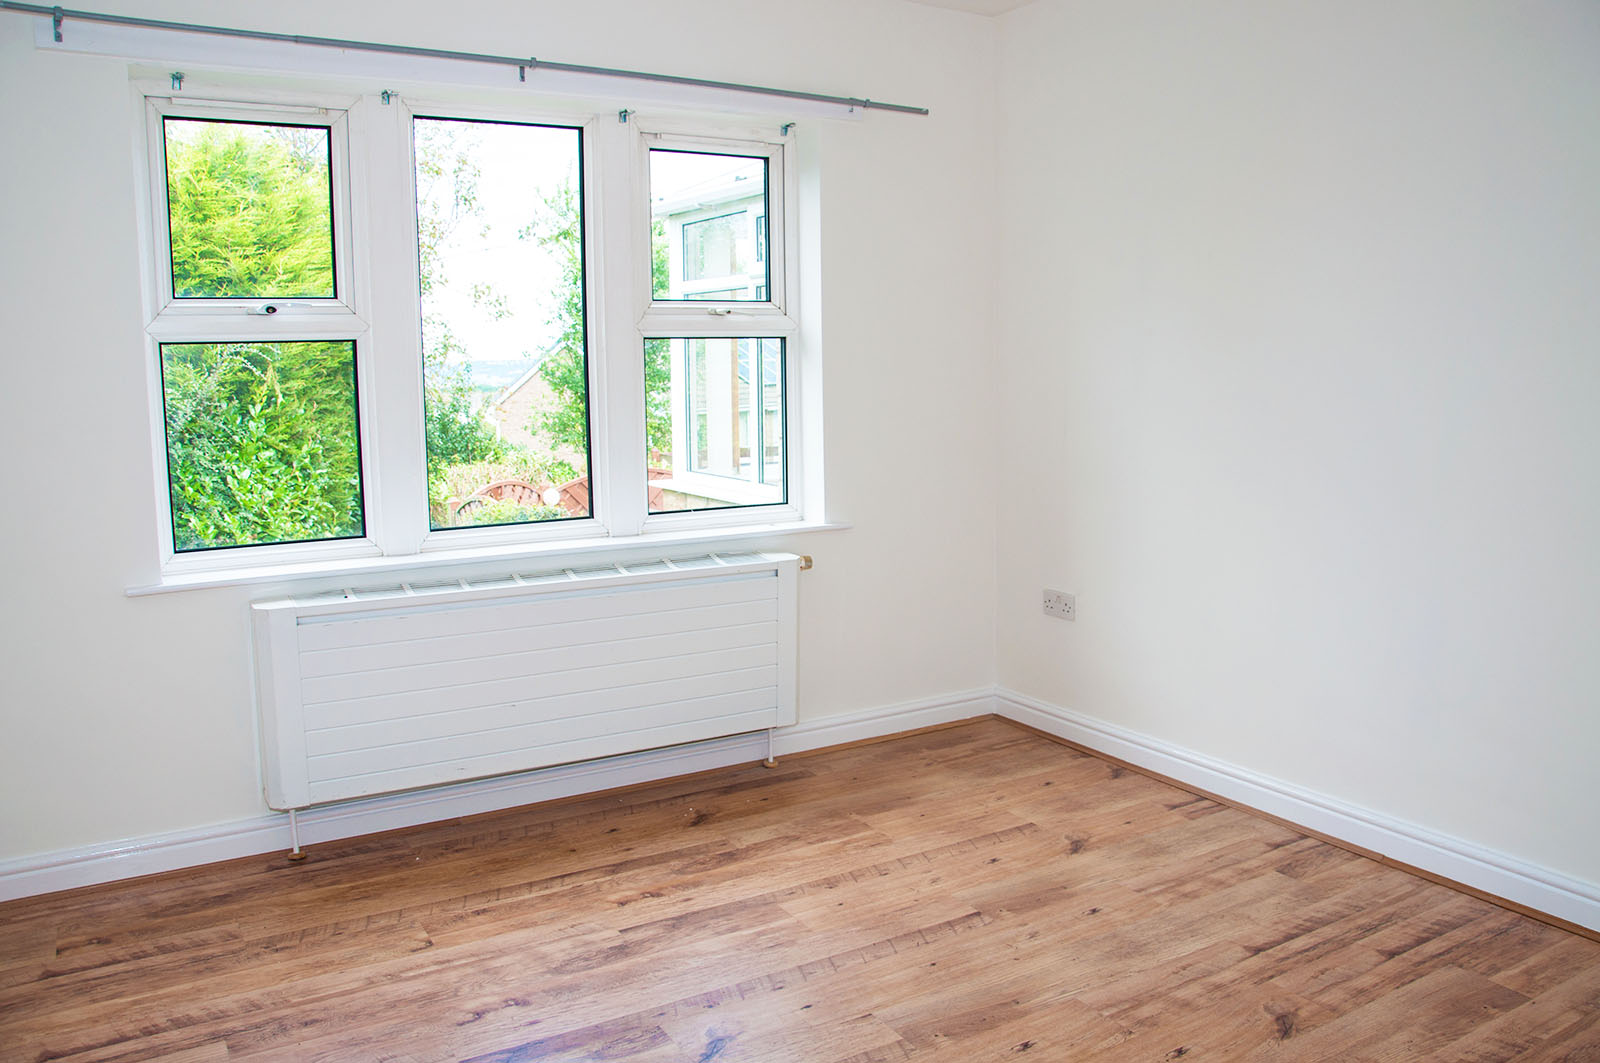 Living room with wooden floor and 3 windows